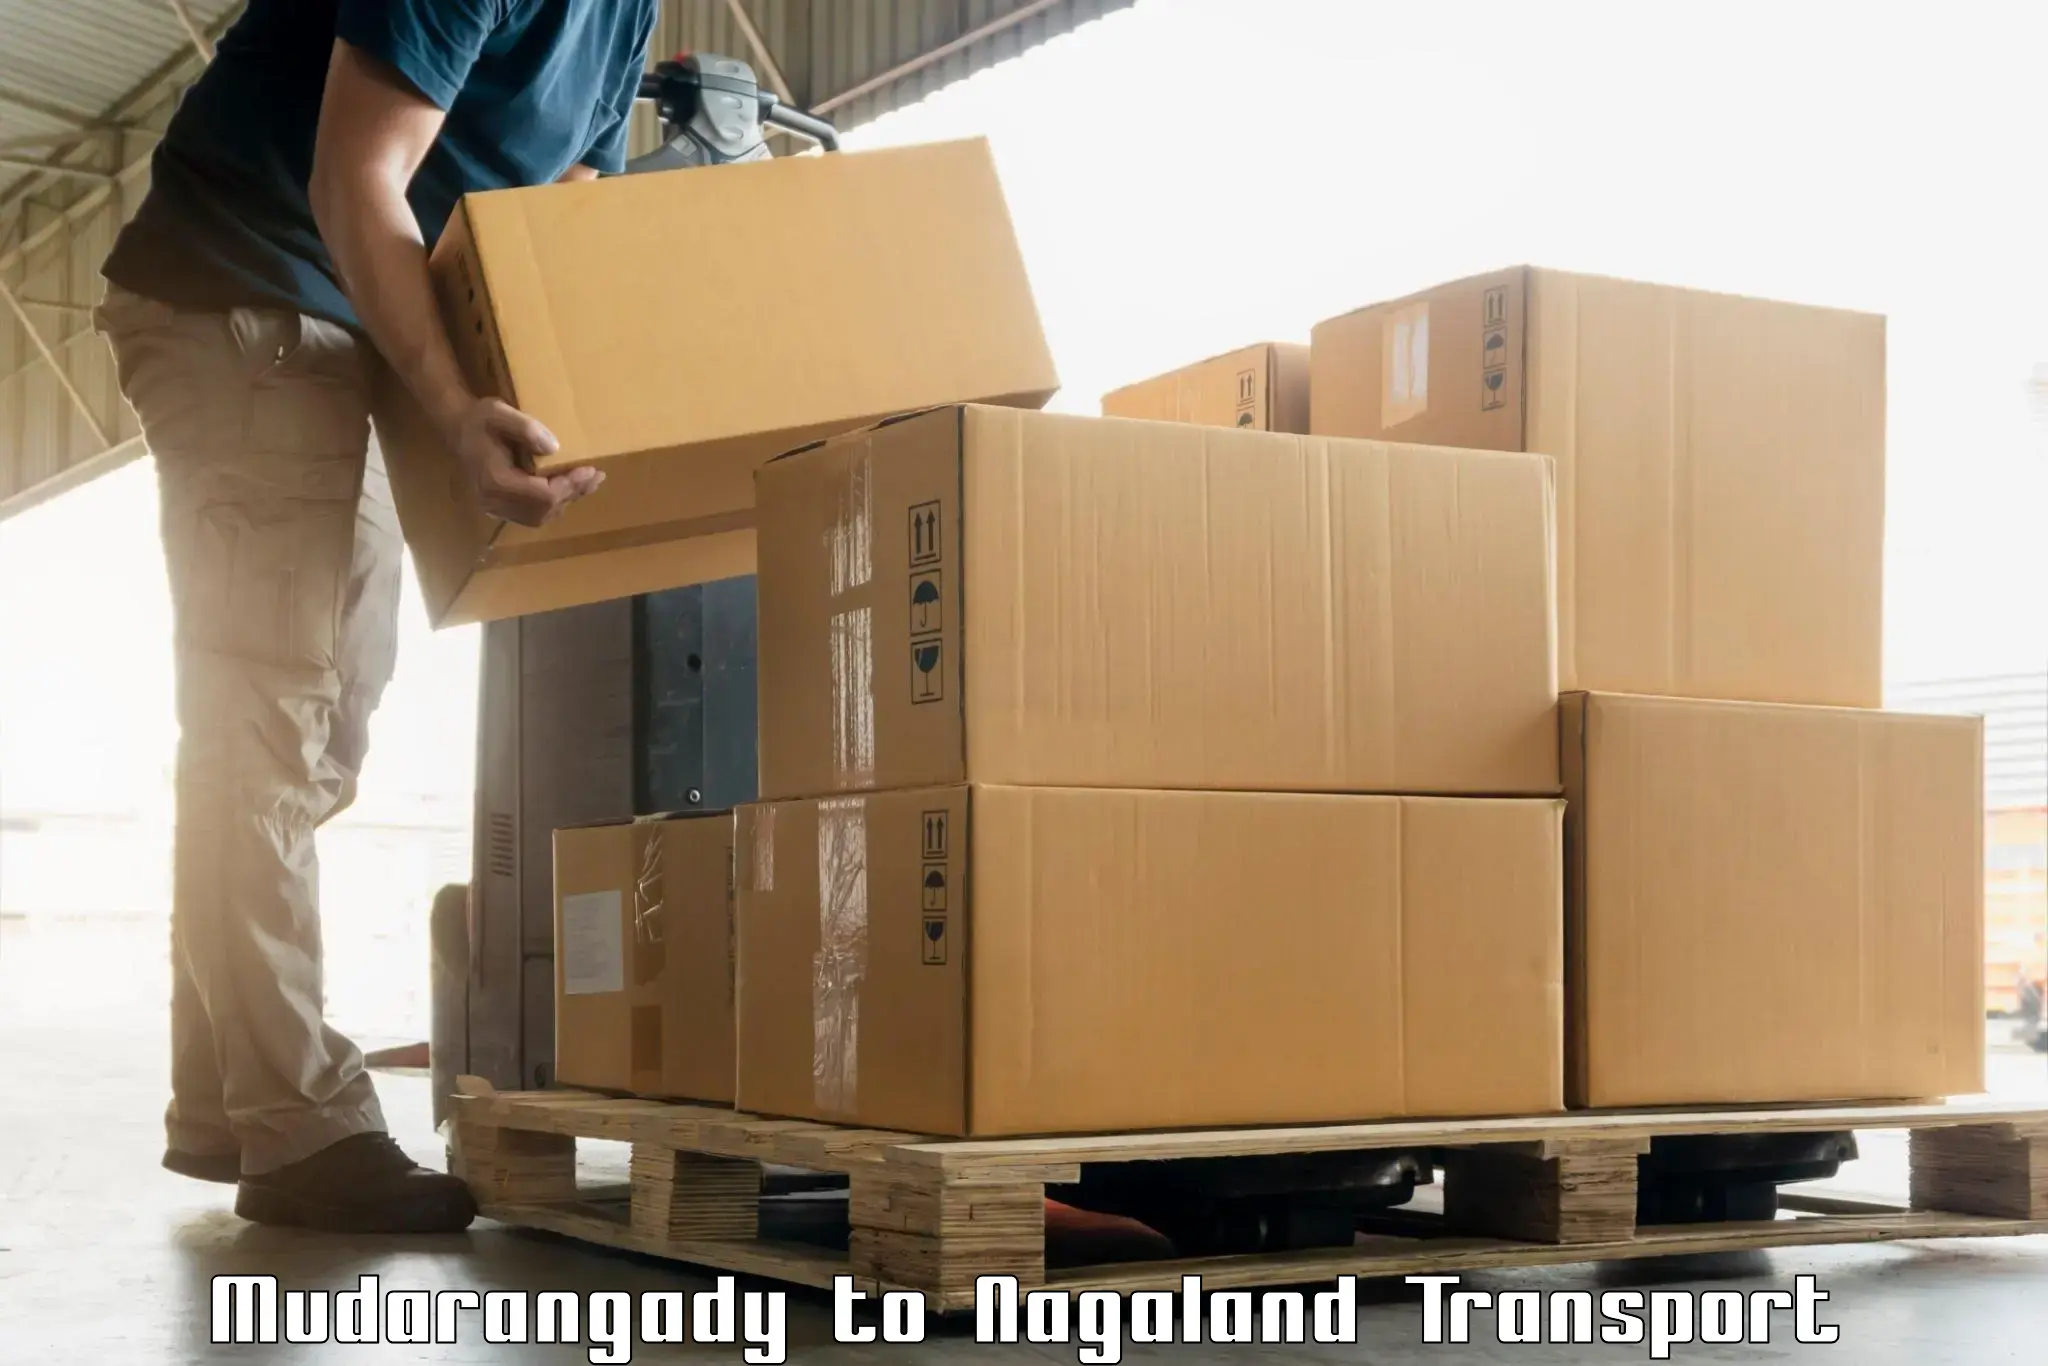 Container transport service Mudarangady to Longleng